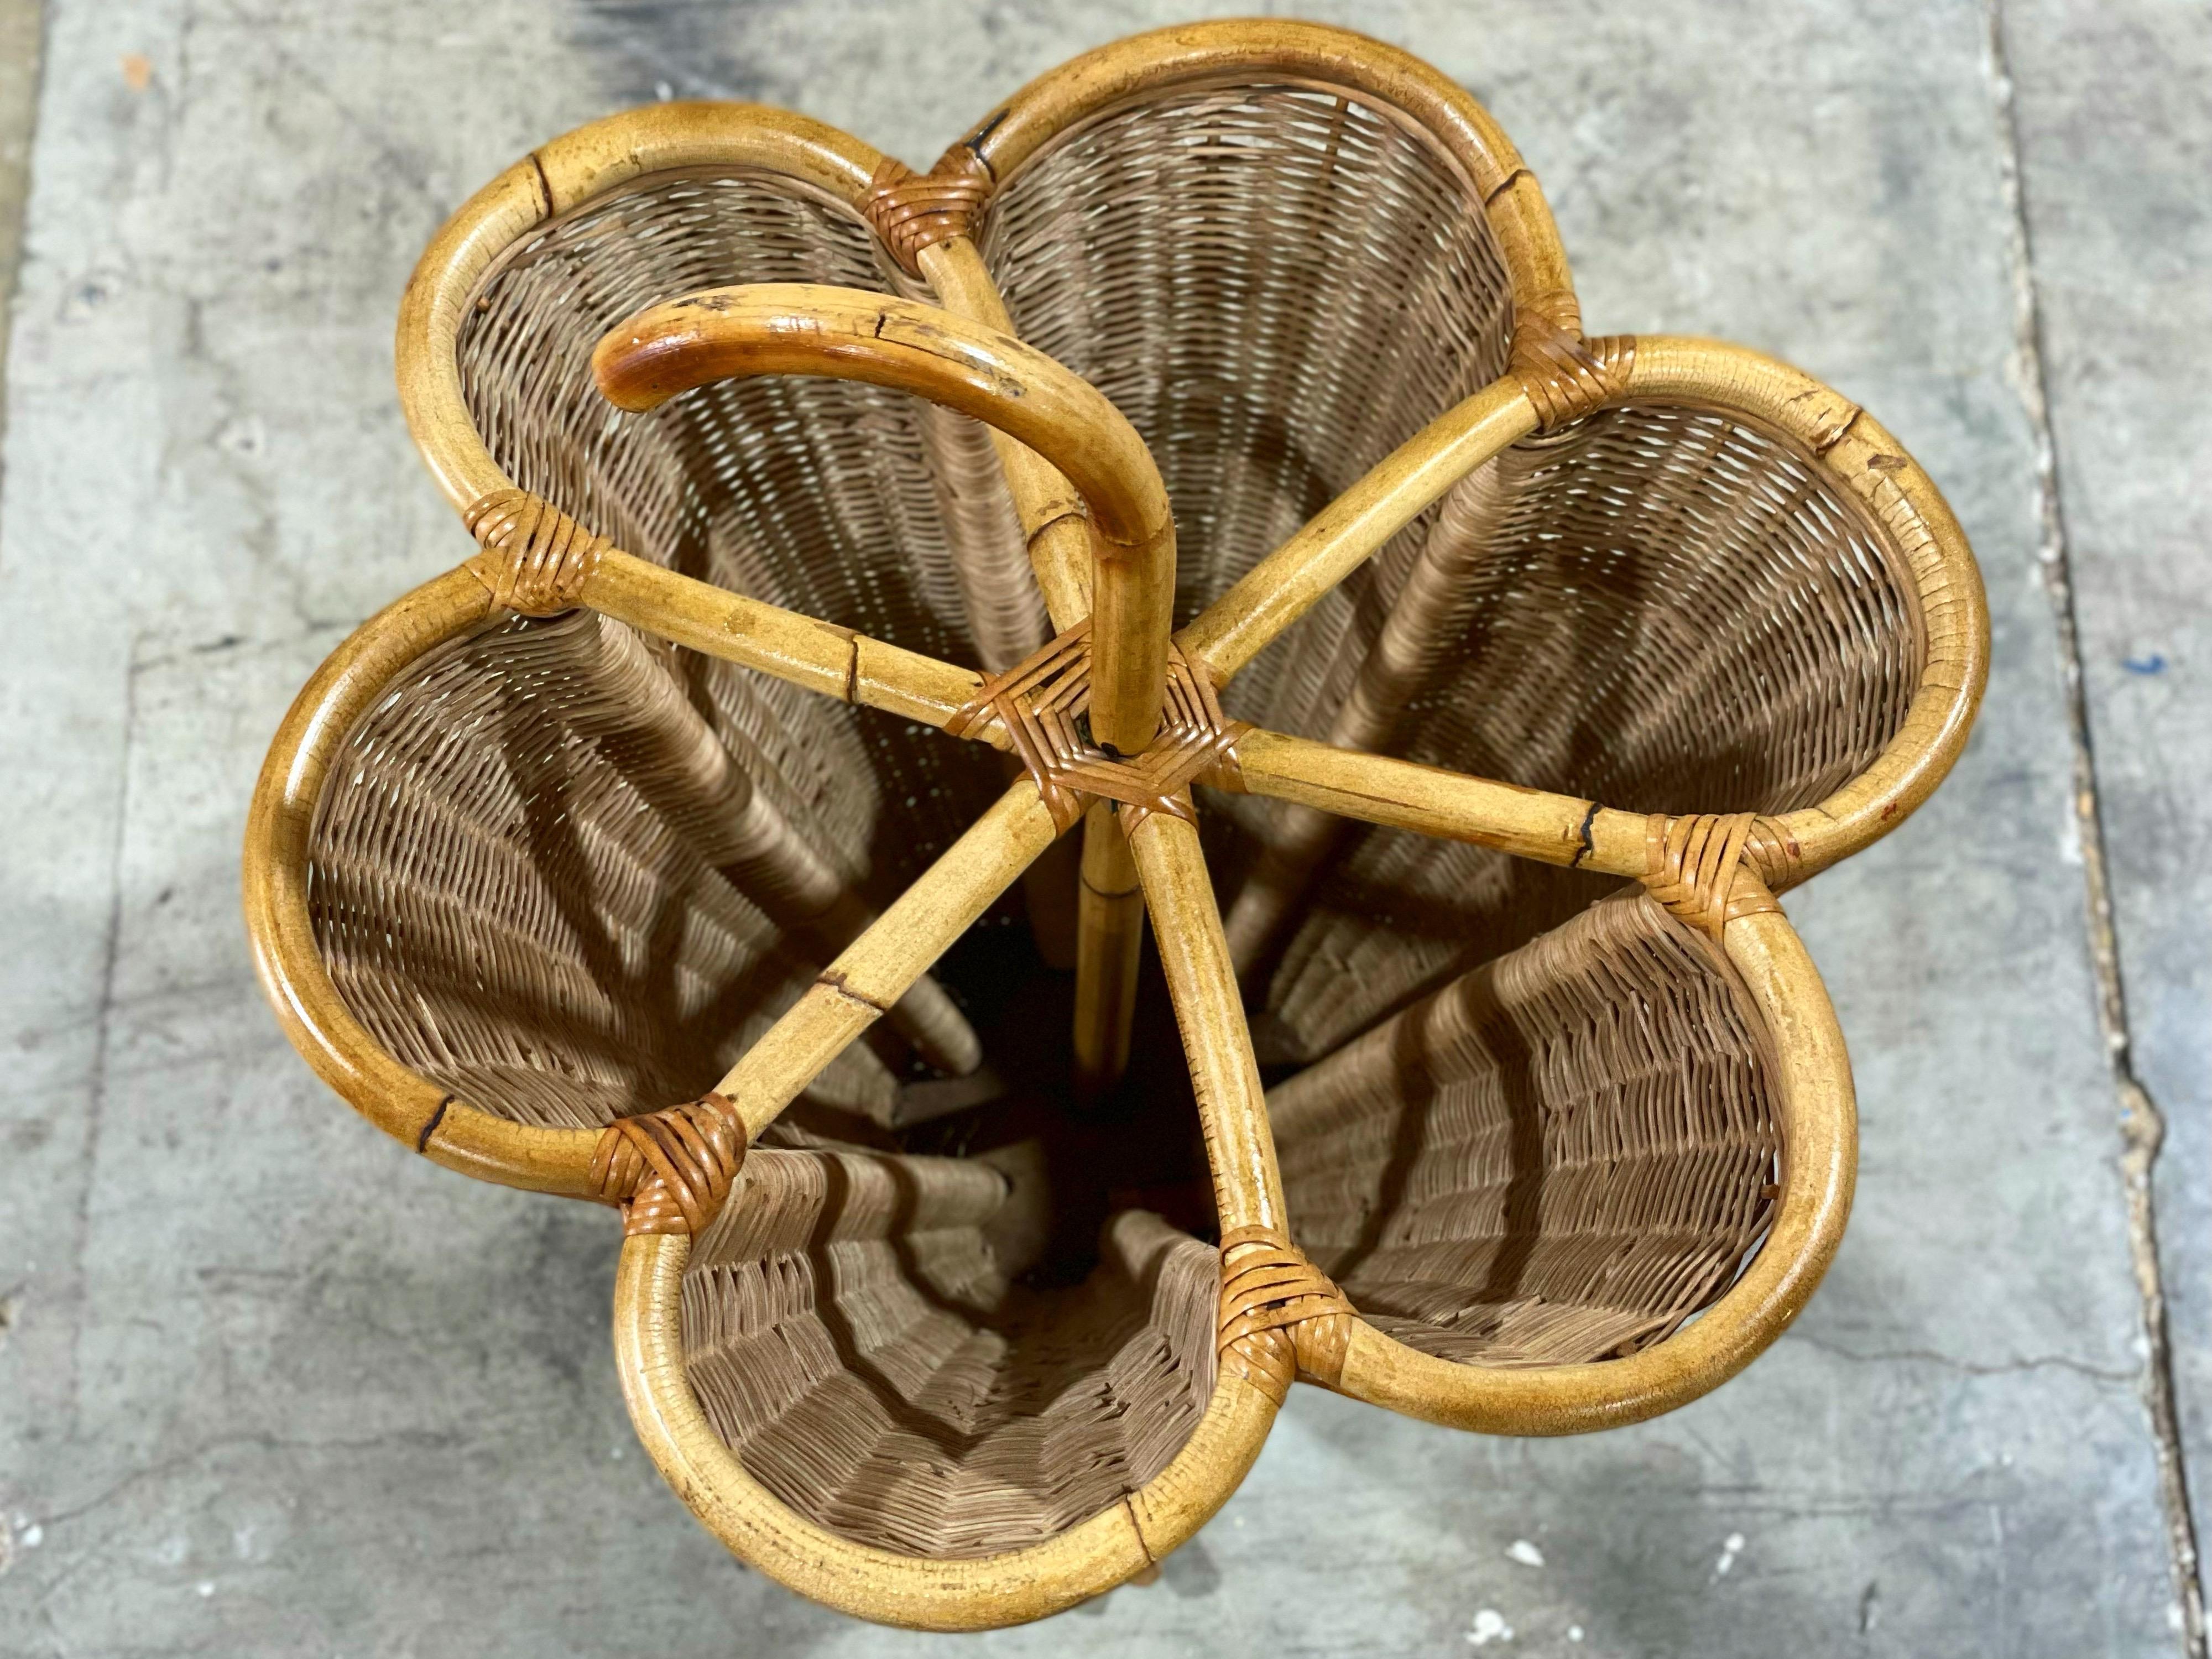 Gorgeous French rattan and wicker umbrella holder from the 1960s. Classic modern organic vibe. Beautiful warm patina. Excellent condition. Thoroughly cleaned and re-lacquered by our in house team. Ready for use.

Measures: D24